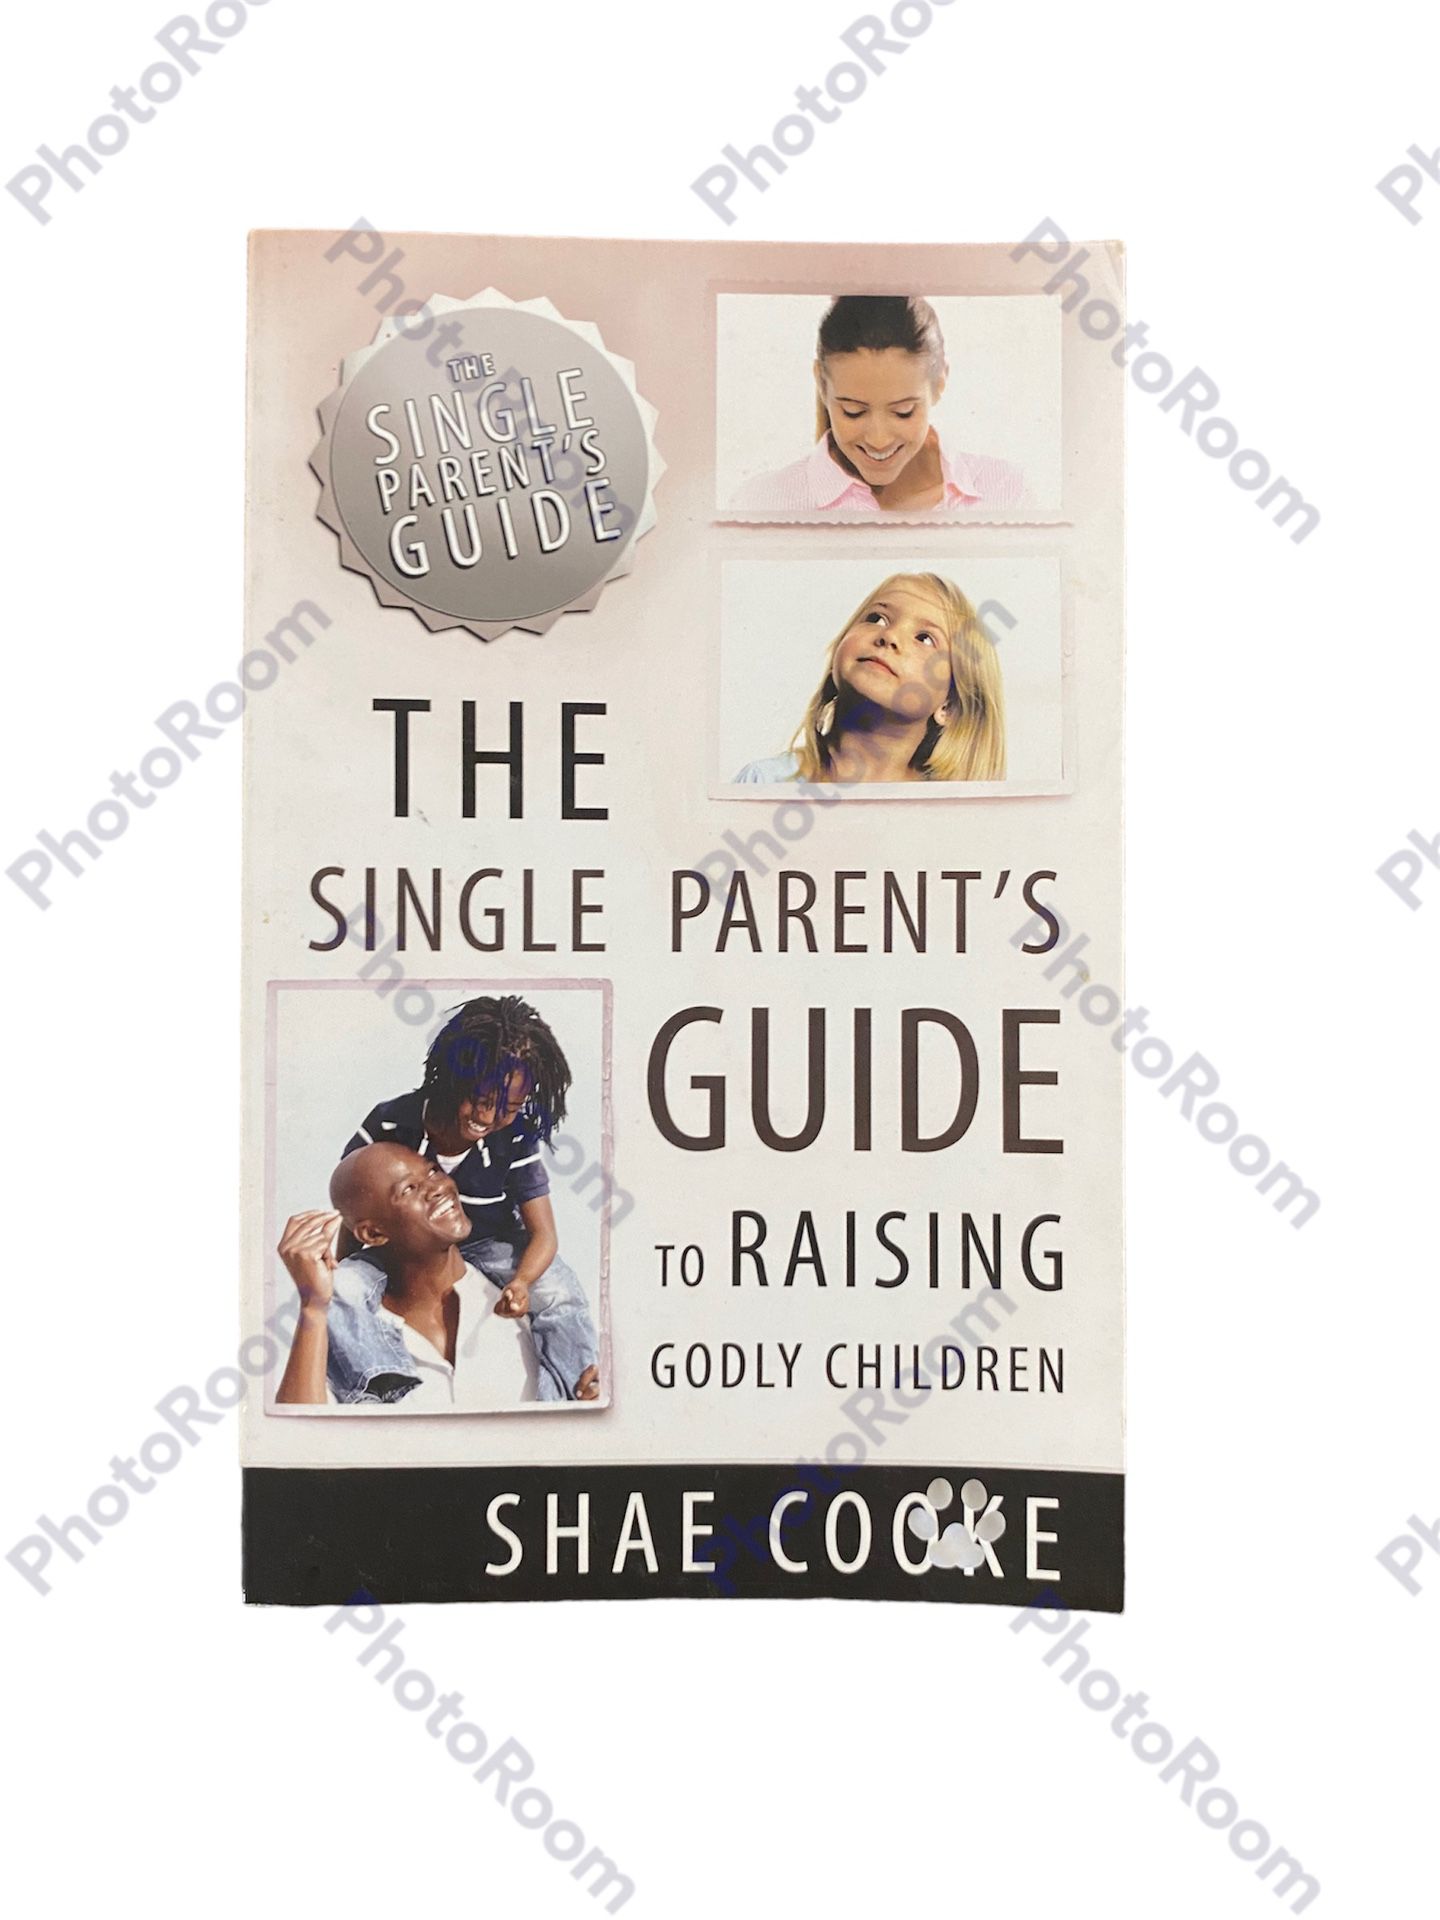 Trade Paperback Book, “The Single Parent’s Guide To Raising Godly Children”